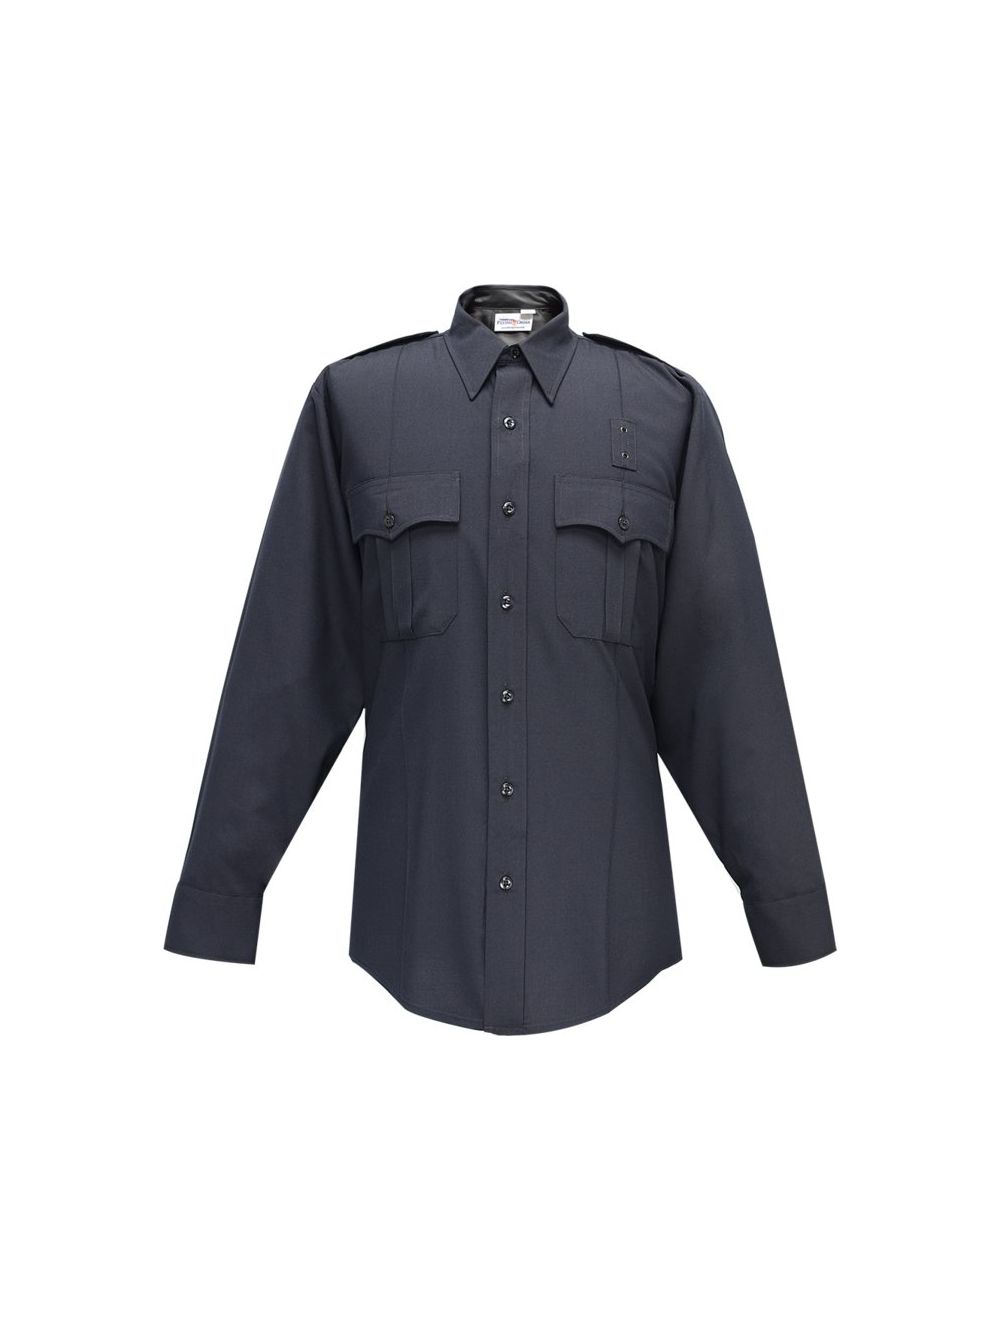 Justice Long Sleeve Shirt w/ Pleated Pockets - LAPD Navy